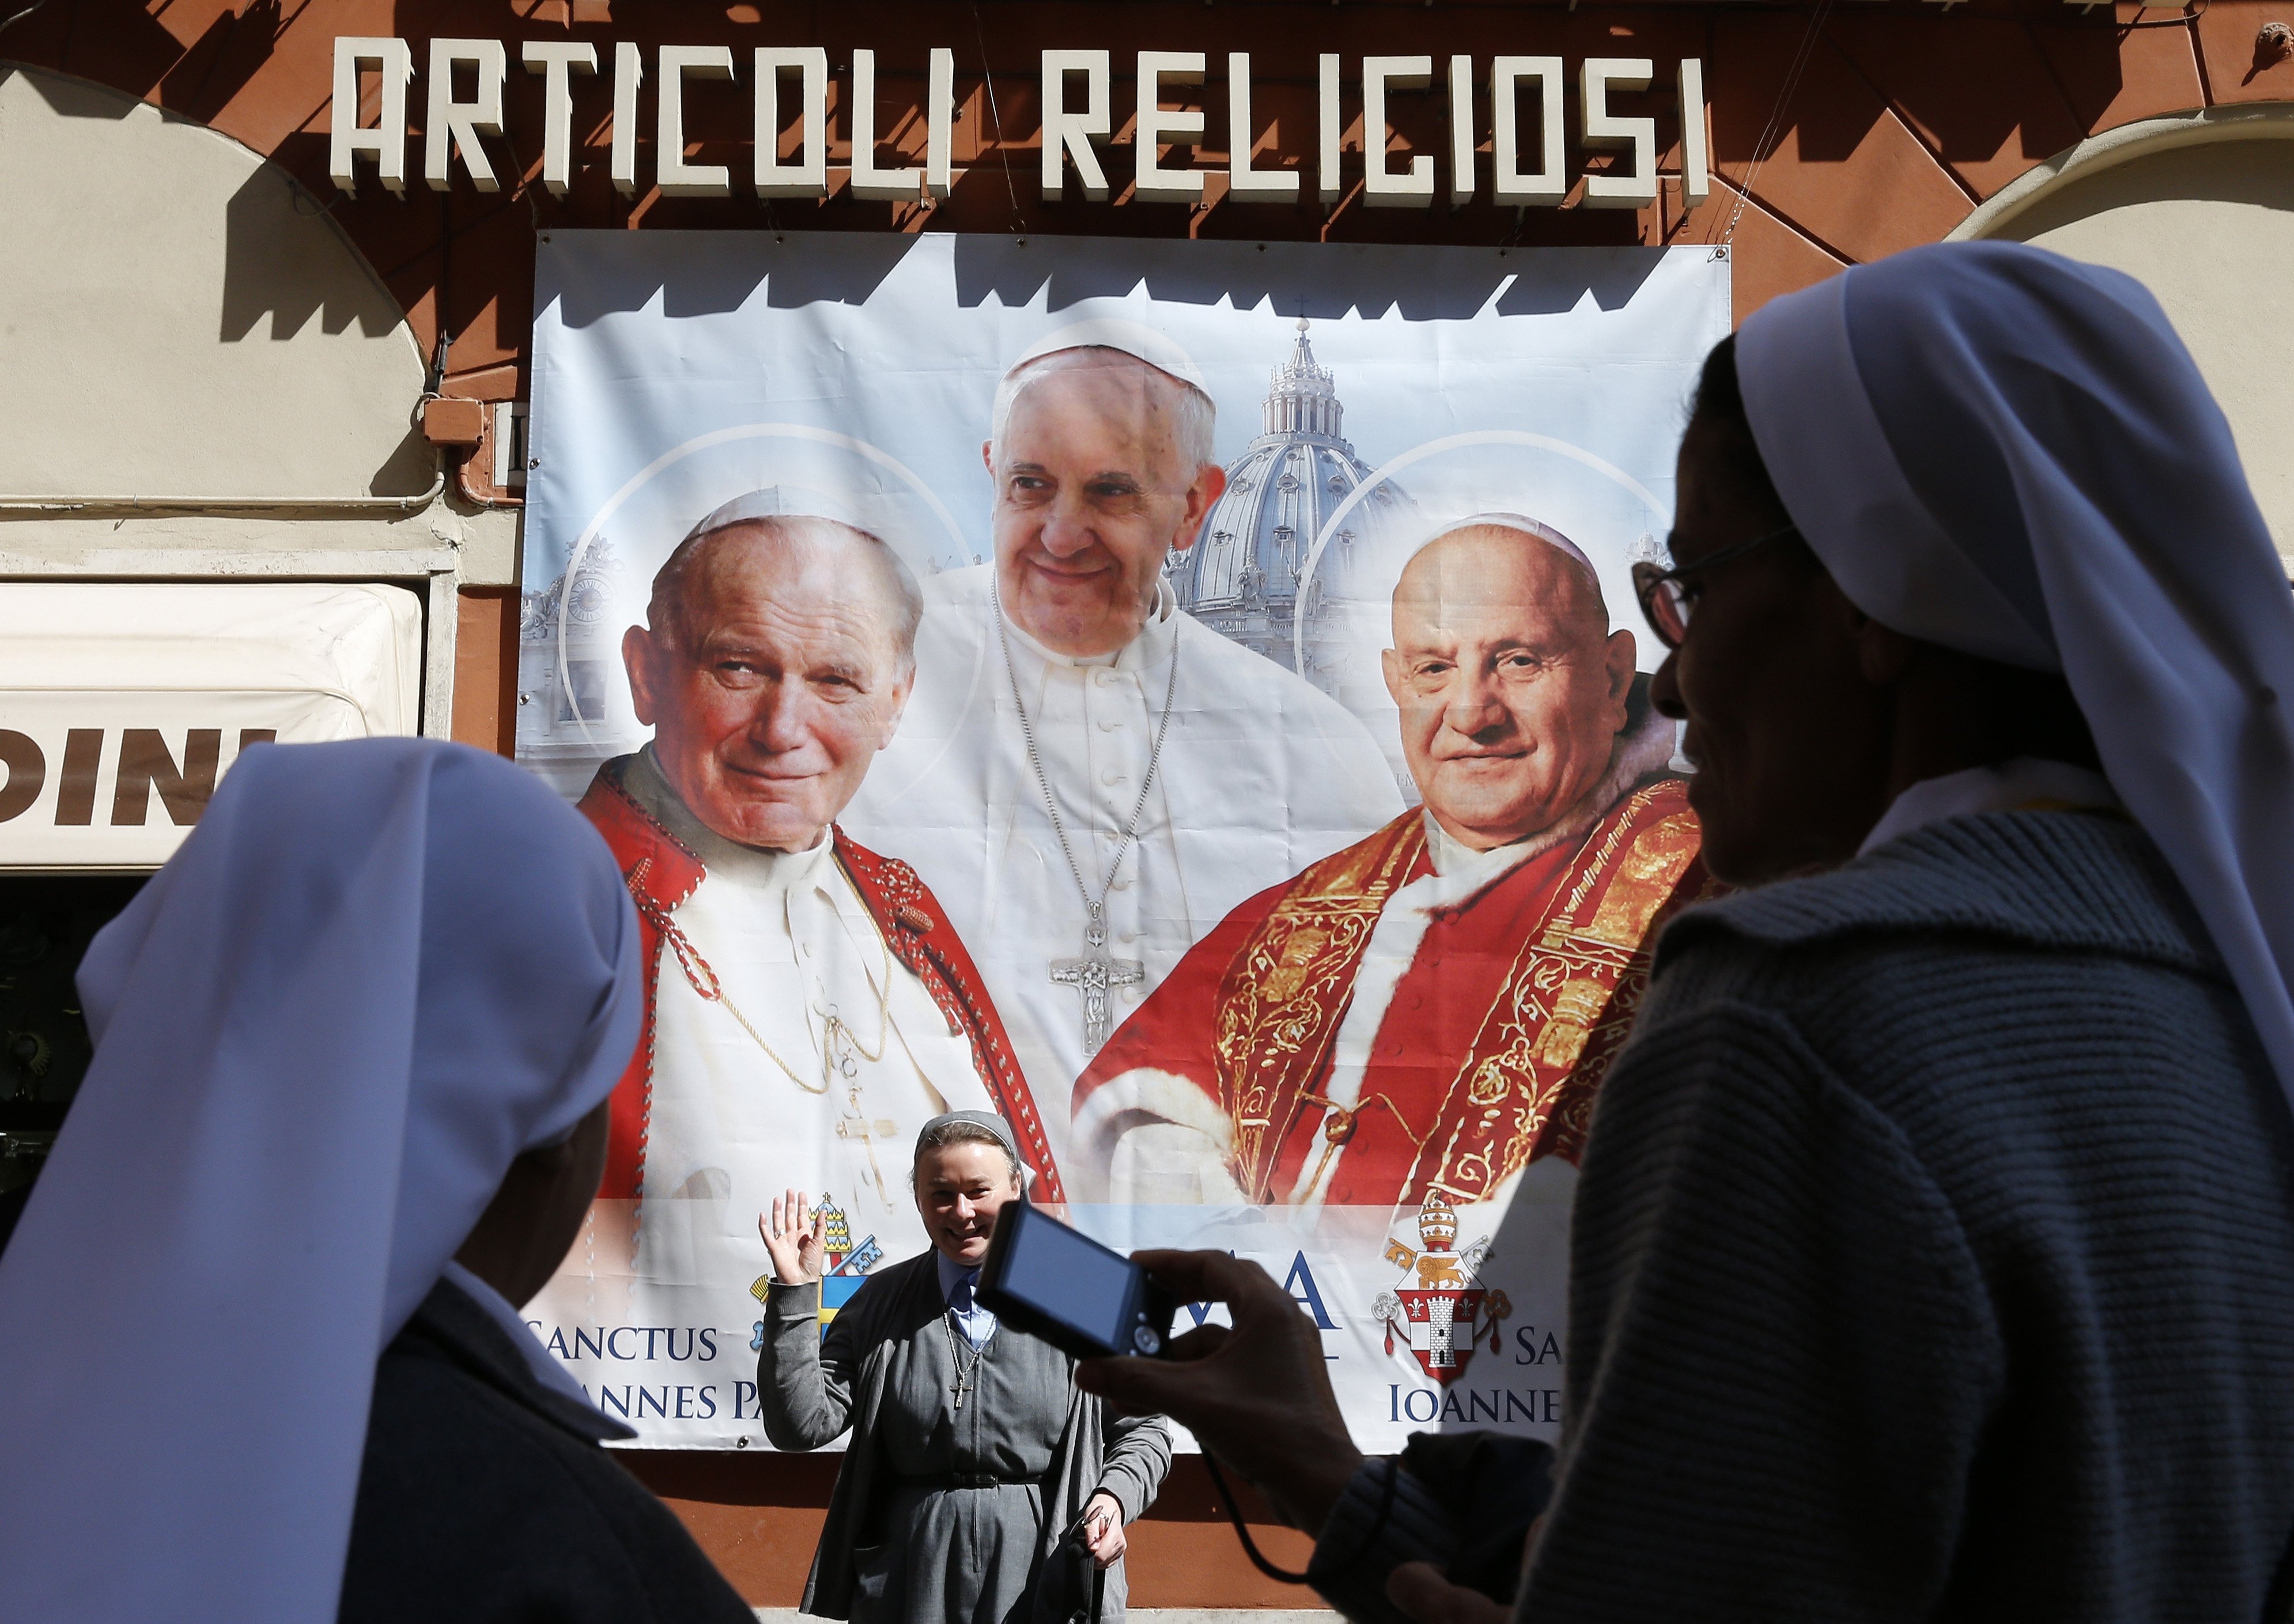 Nuns from Brazil take photos in front of a large banner of Pope Francis, then-Blesseds John XXIII and John Paul II in Rome in this April 25, 2014, file photo. With the news that Pope John Paul I will be beatified, some have begun to wonder if being pope i